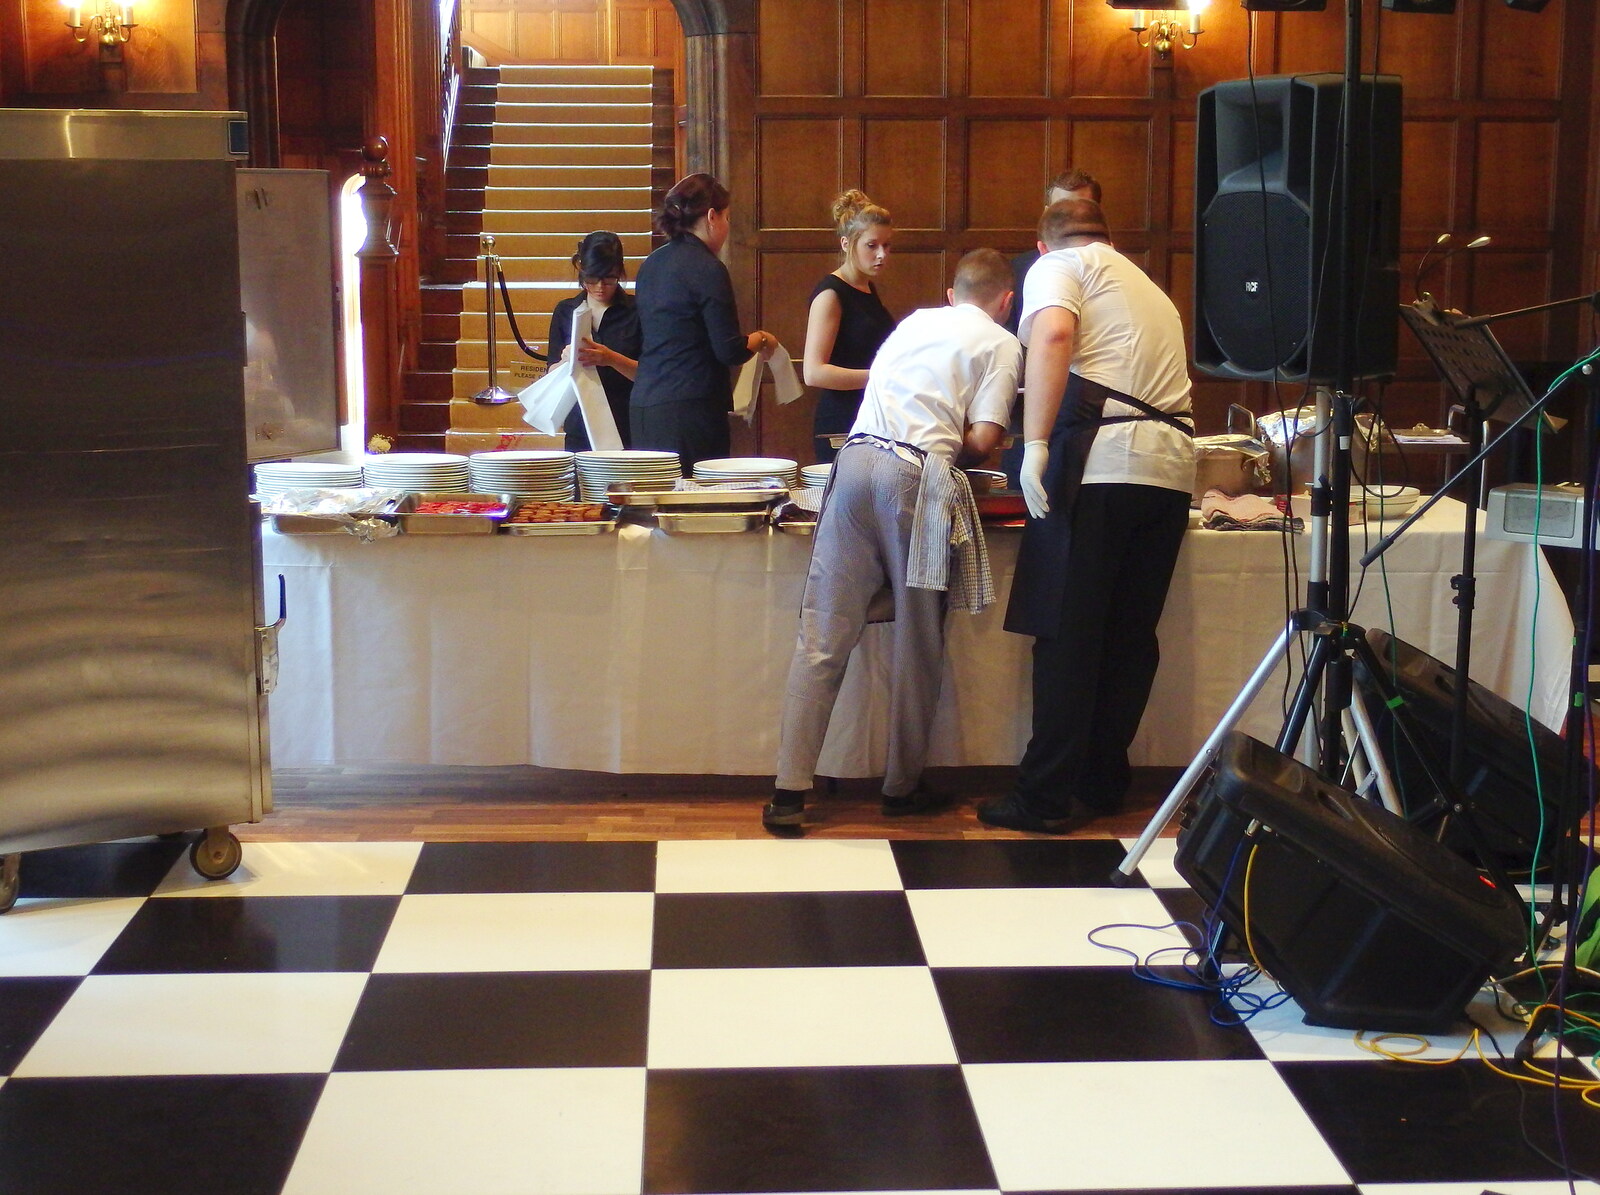 The caterers get ready from The BBs at Hengrave Hall, Hengrave, Suffolk - 18th August 2013